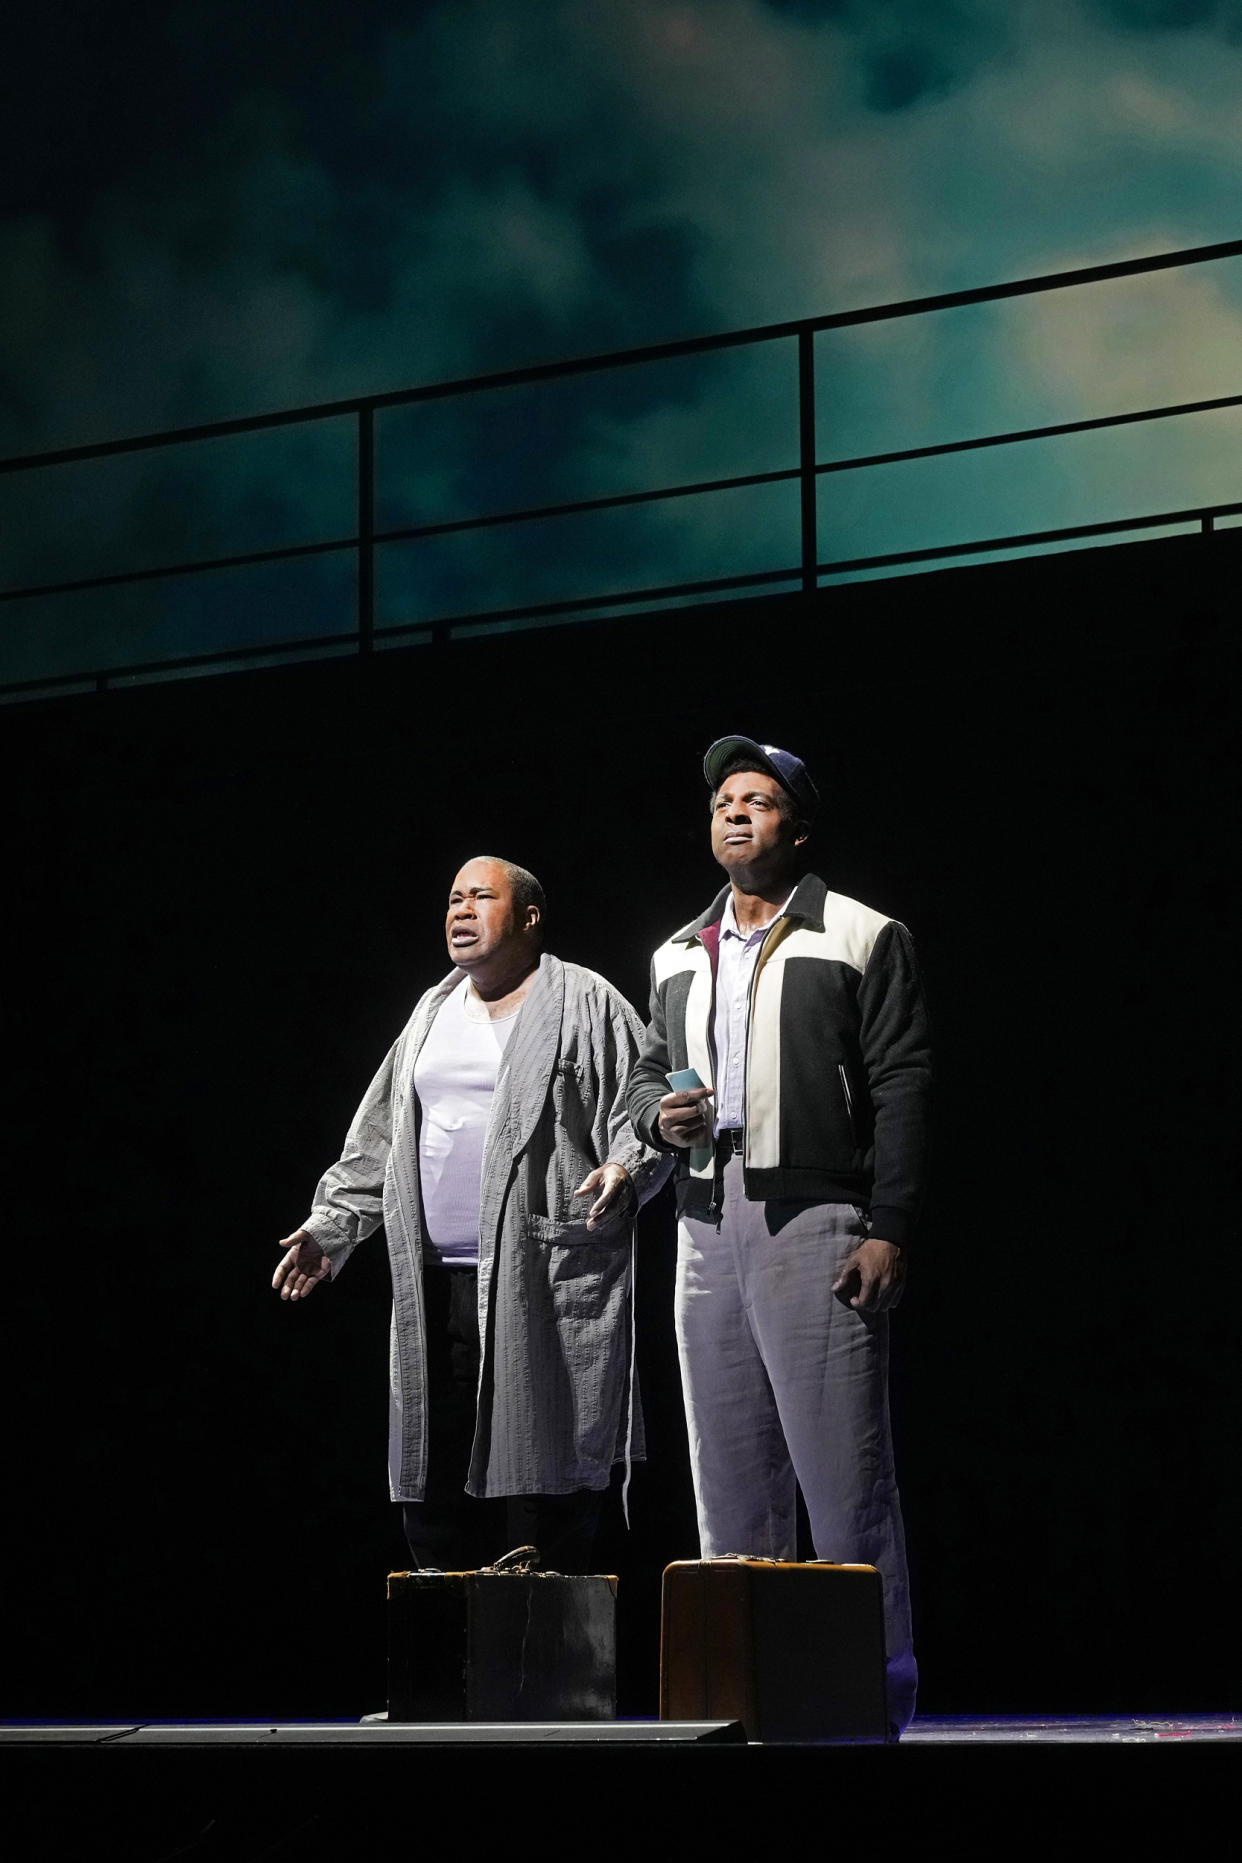 Eric Owens as Emile Griffith and Ryan Speedo Green as young Emile Griffith in Terence Blanchard's 